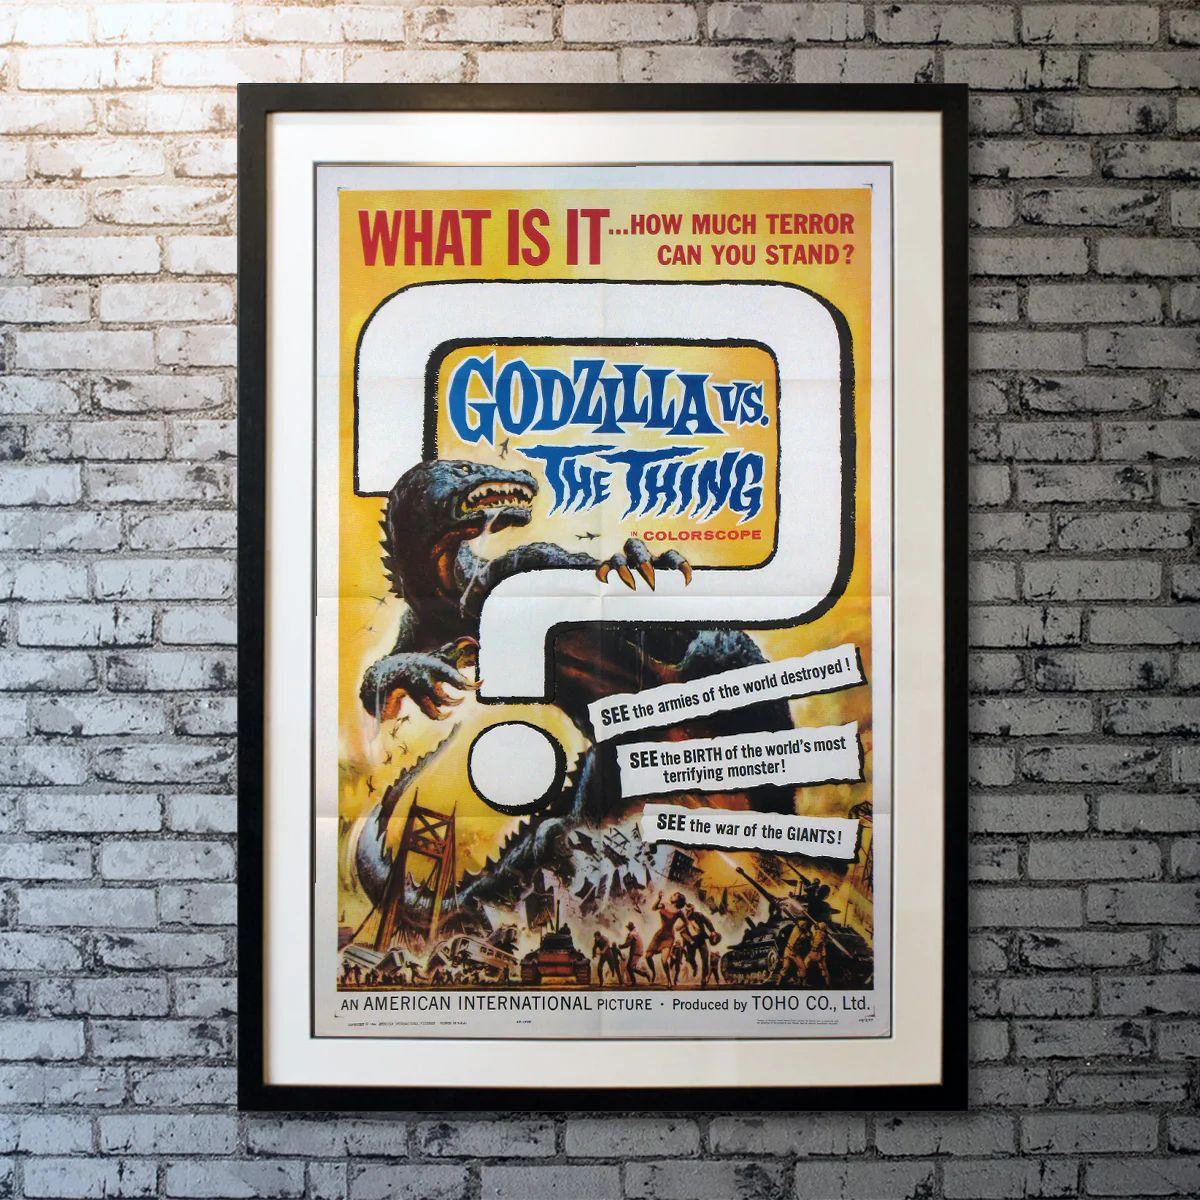 Mothra vs. Godzilla, Unframed Poster, 1964

Original One Sheet (27 X 41 Inches). Mothra's egg washes ashore and is claimed by greedy entrepreneurs who refuse to return it to her fairies. As Godzilla arises near Nagoya, the people of Infant Island